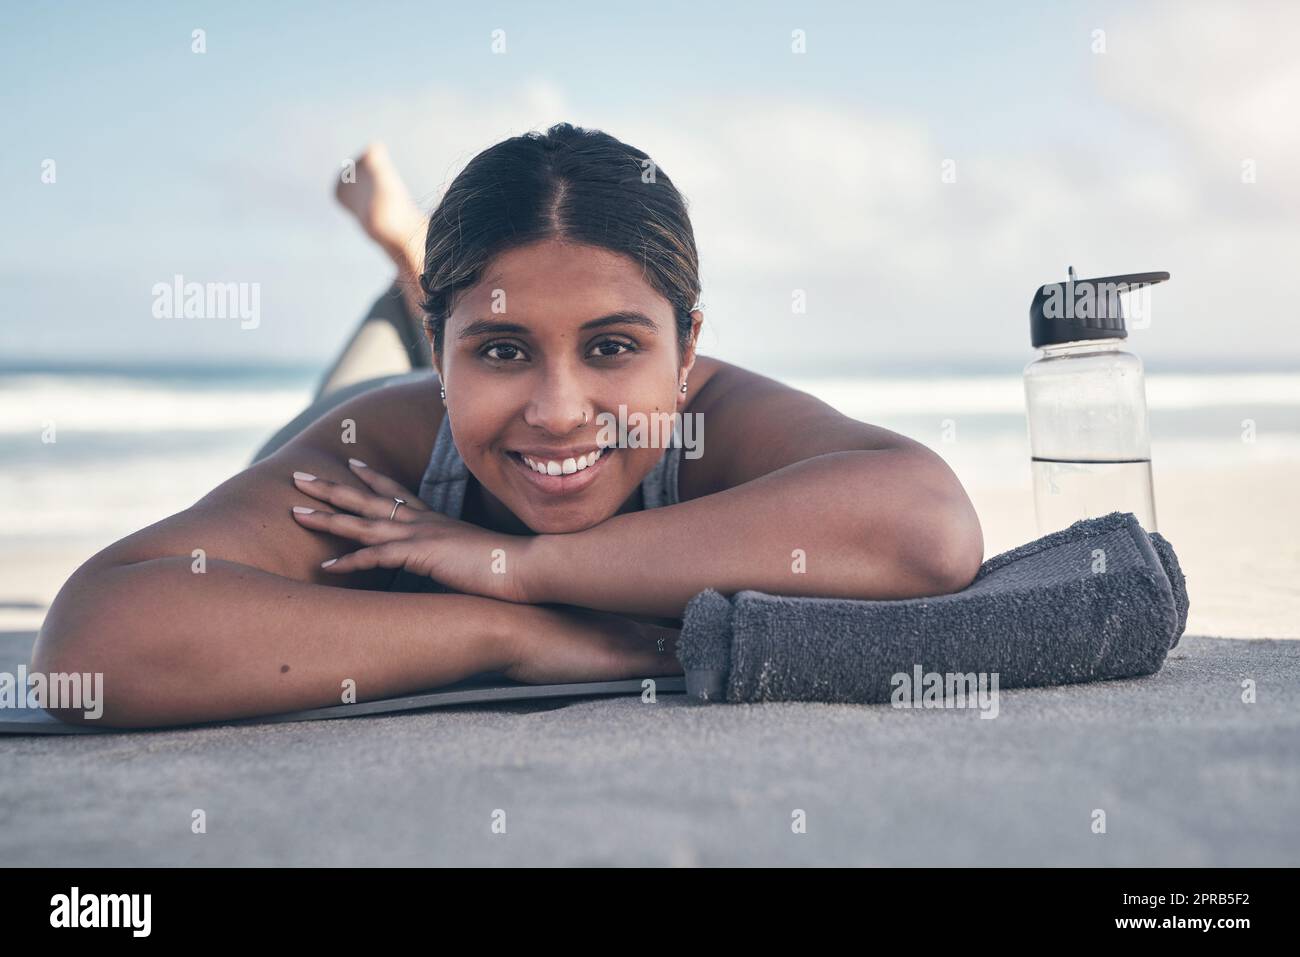 Yoga is one of my favorite forms of exercise. a sporty young woman lying on her yoga mat at the beach. Stock Photo